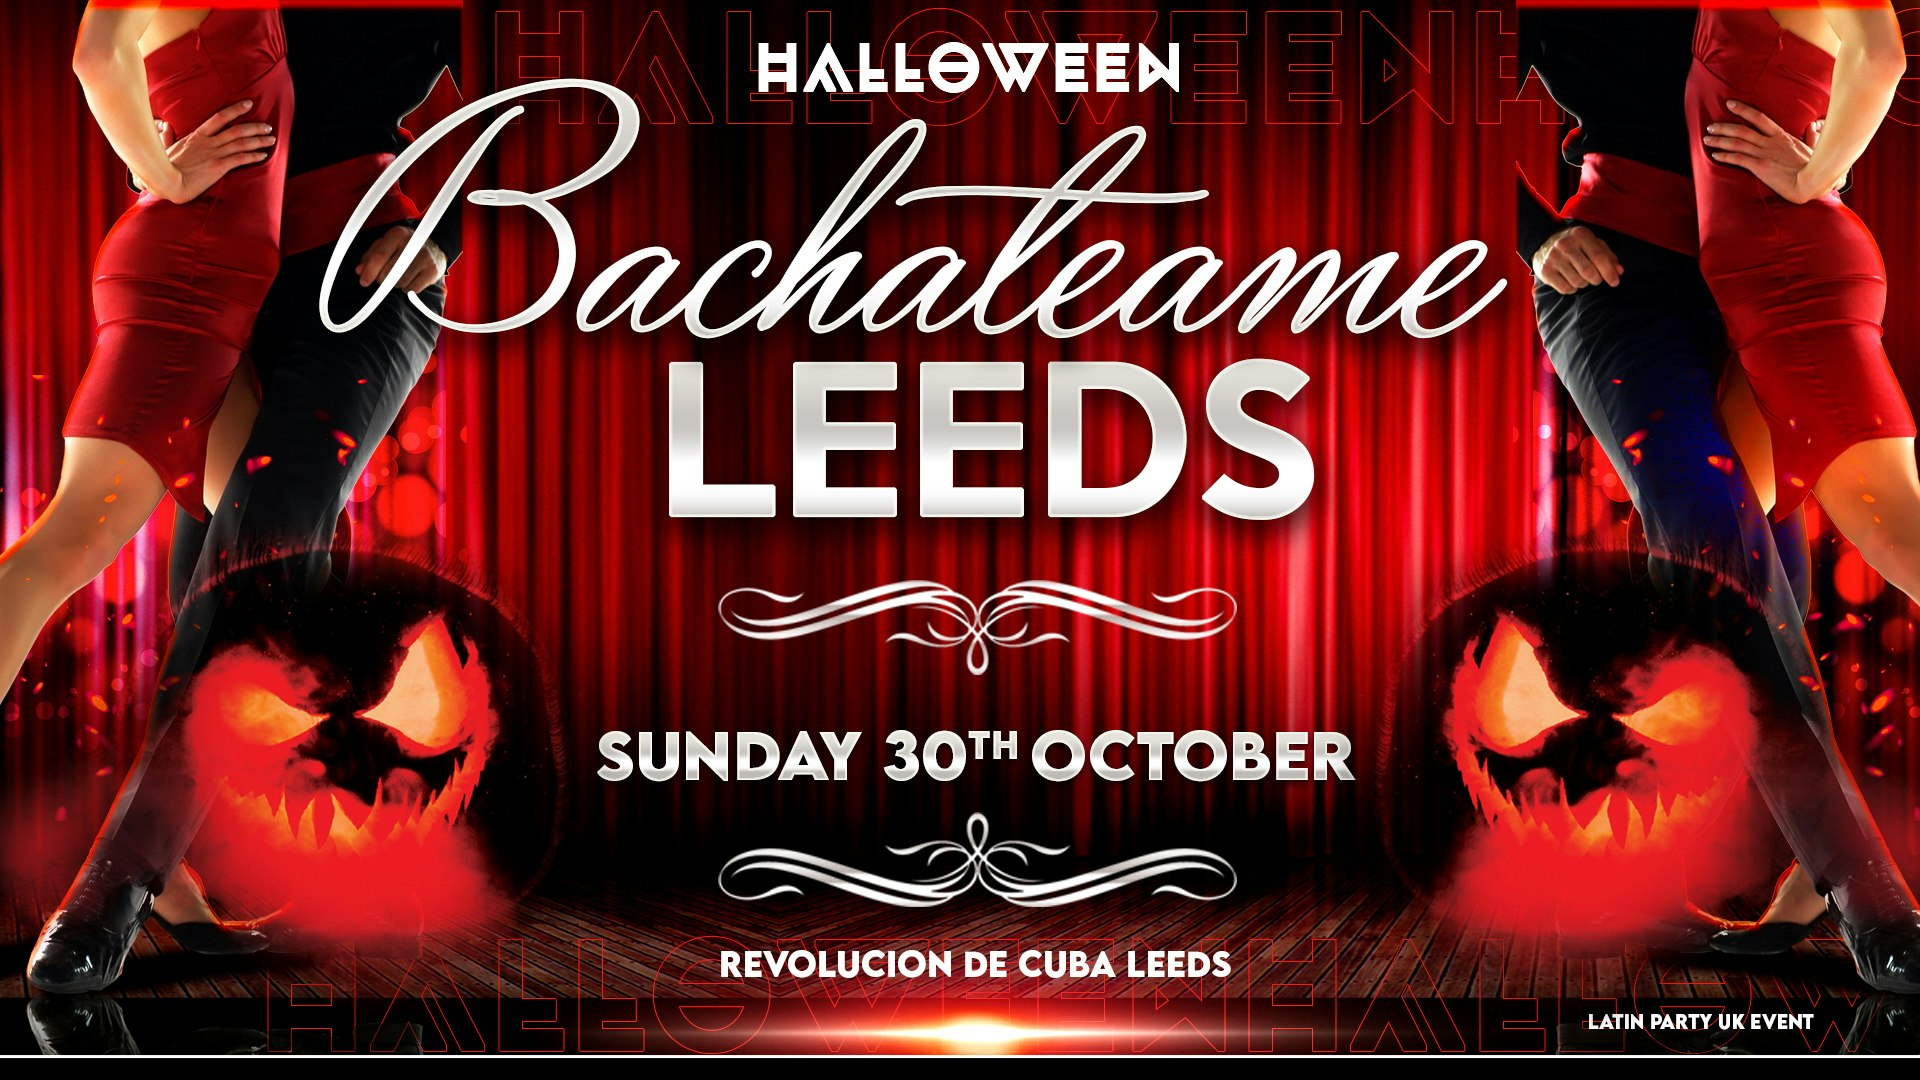 Bachateame Leeds –  Sunday 30th October  | Halloween Special